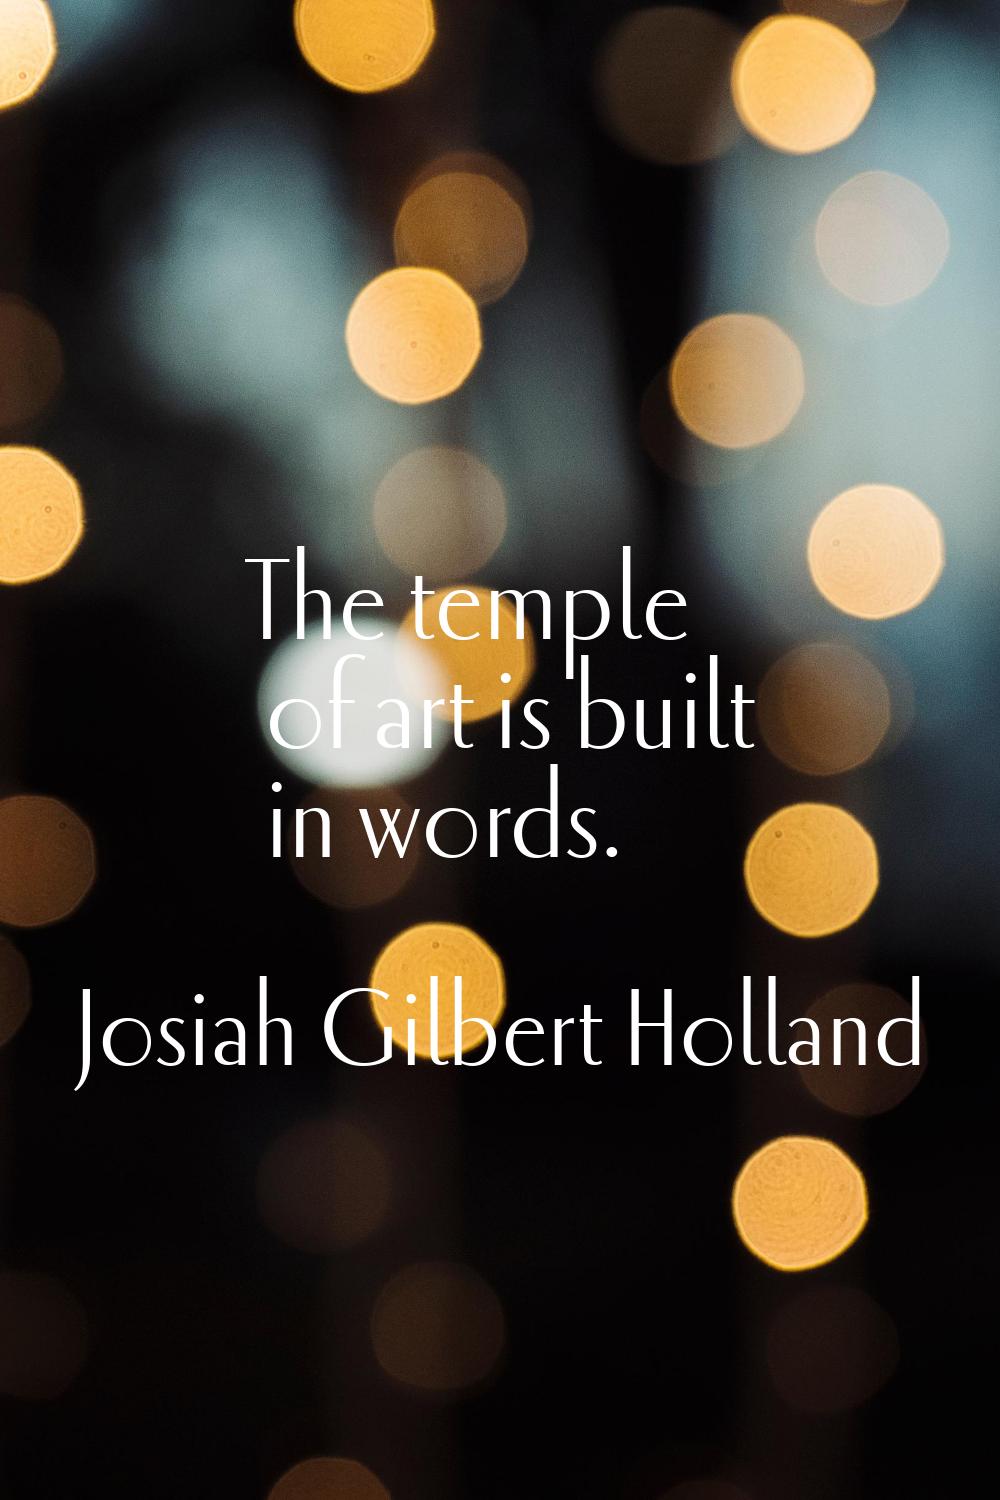 The temple of art is built in words.